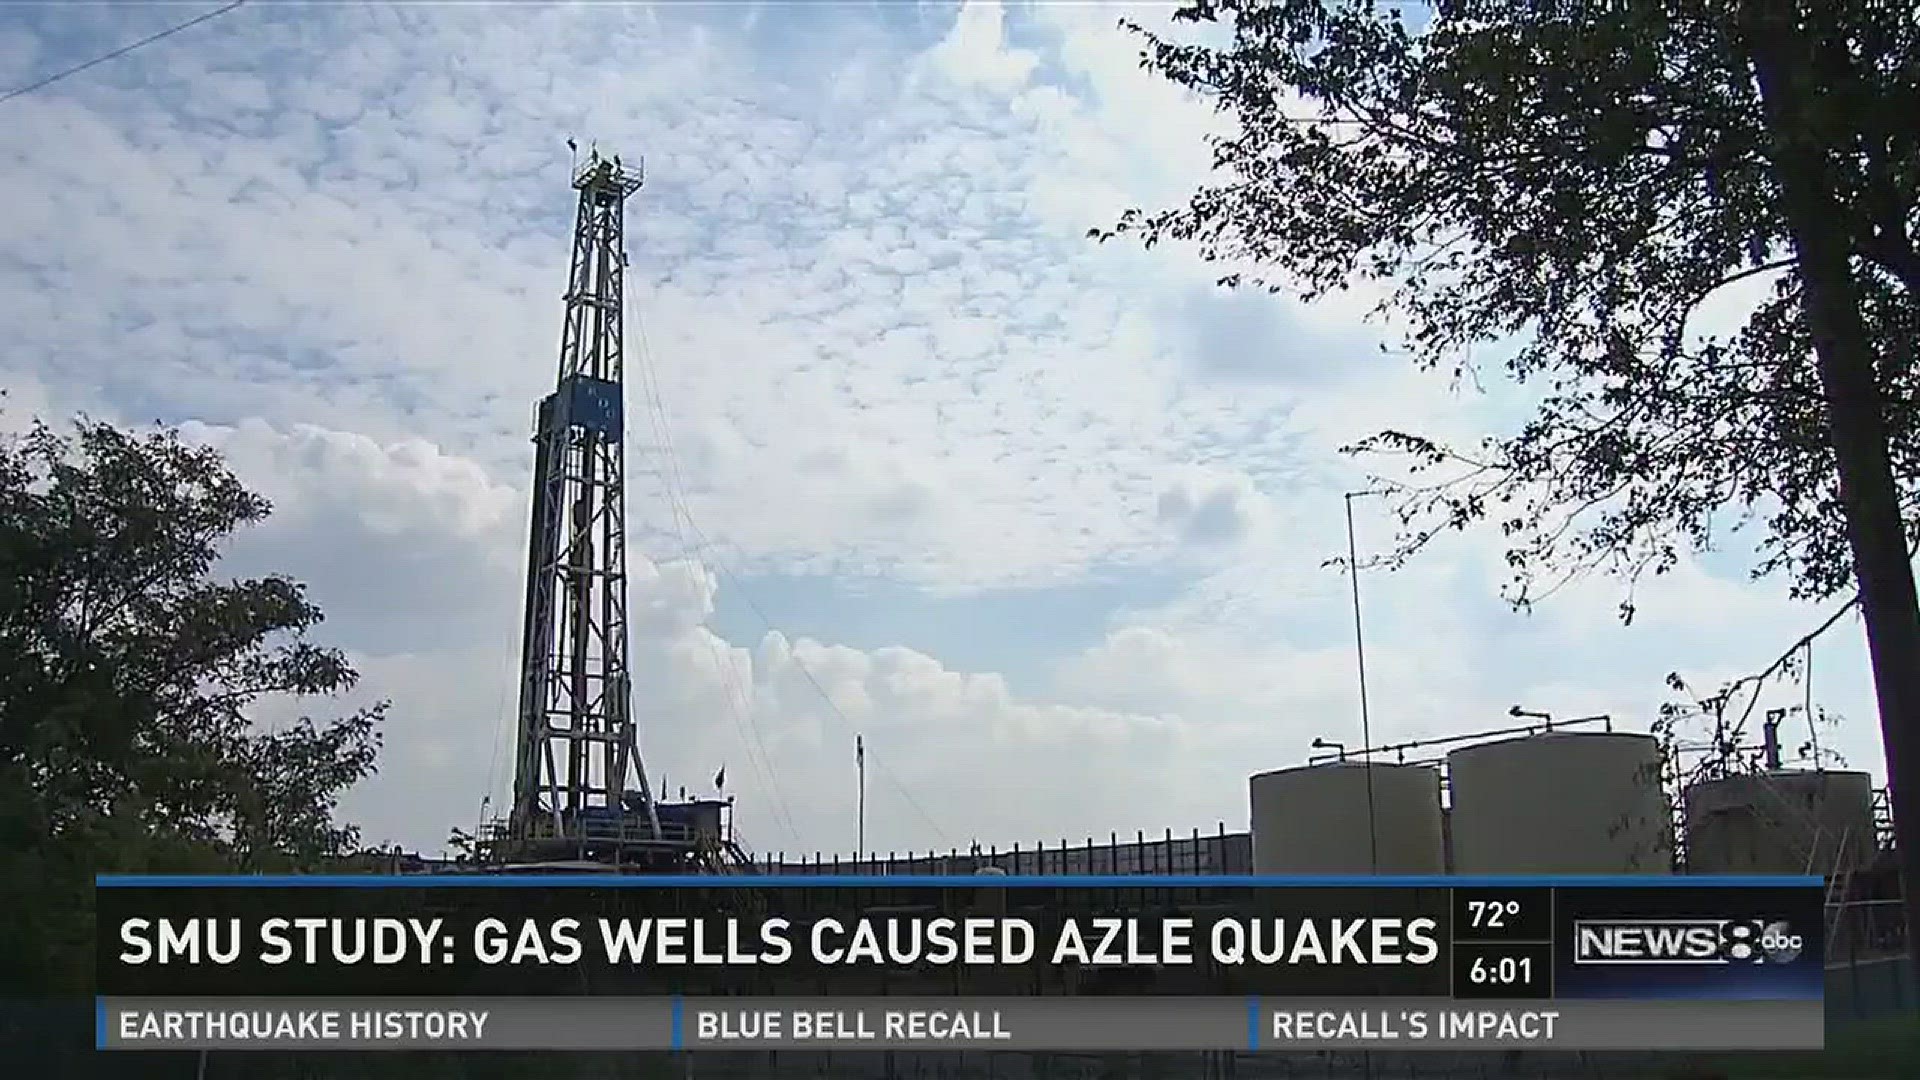 "The most probable cause of seismicity in this region has to do with the oil and gas activities in the Azle-Reno area."